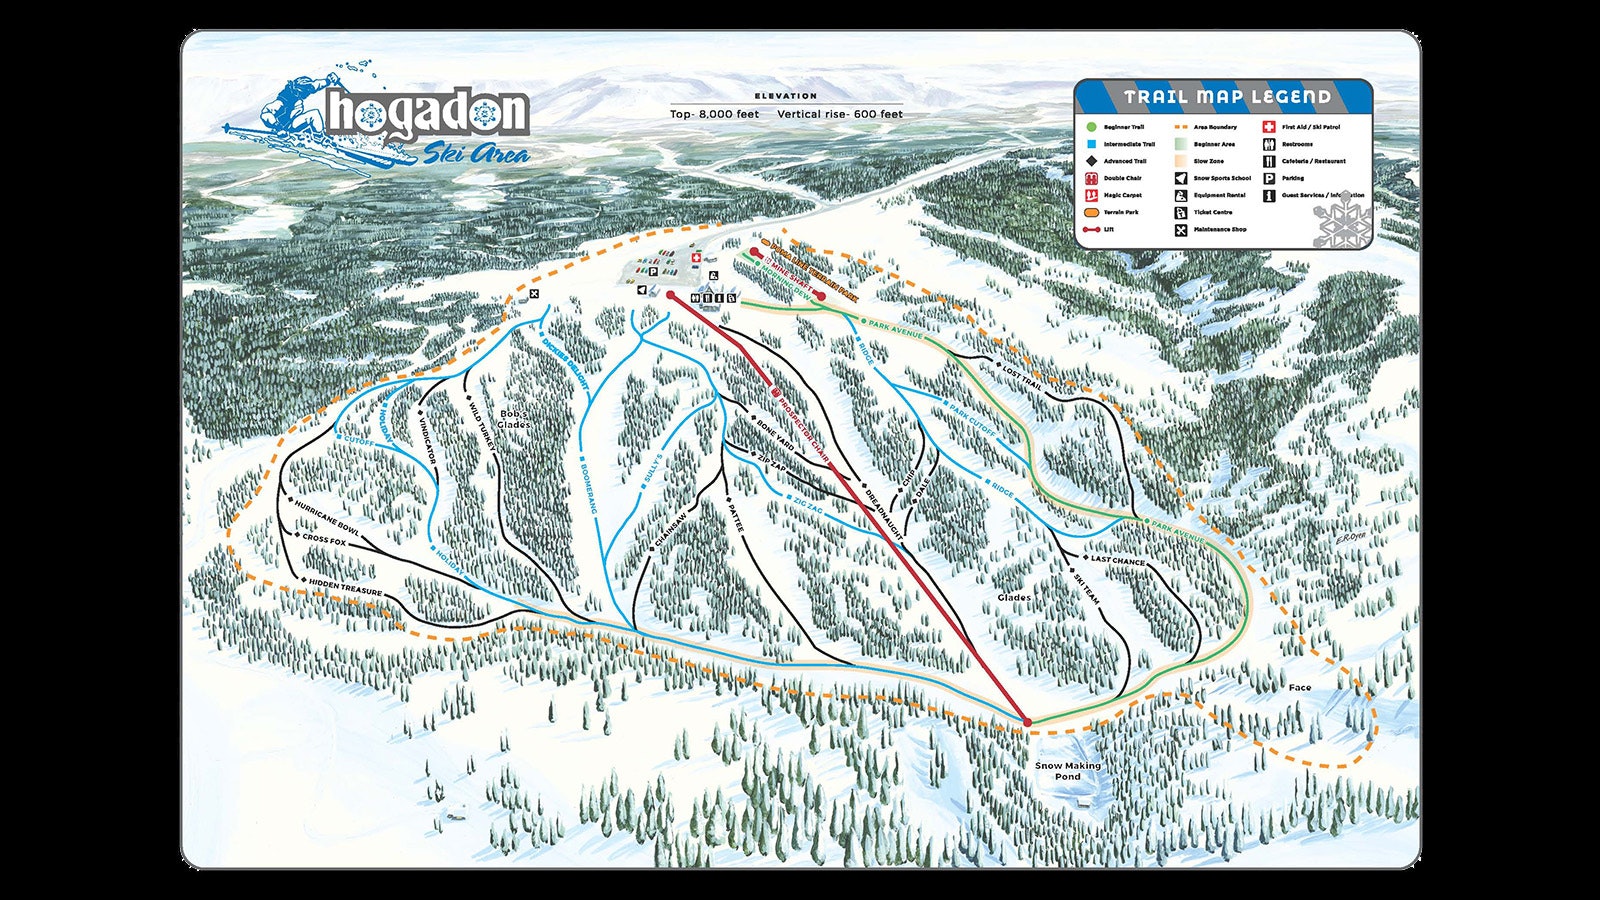 This map shows the parking and staging area at Hogadon near Casper is at the summit instead at the bottom of the runs.